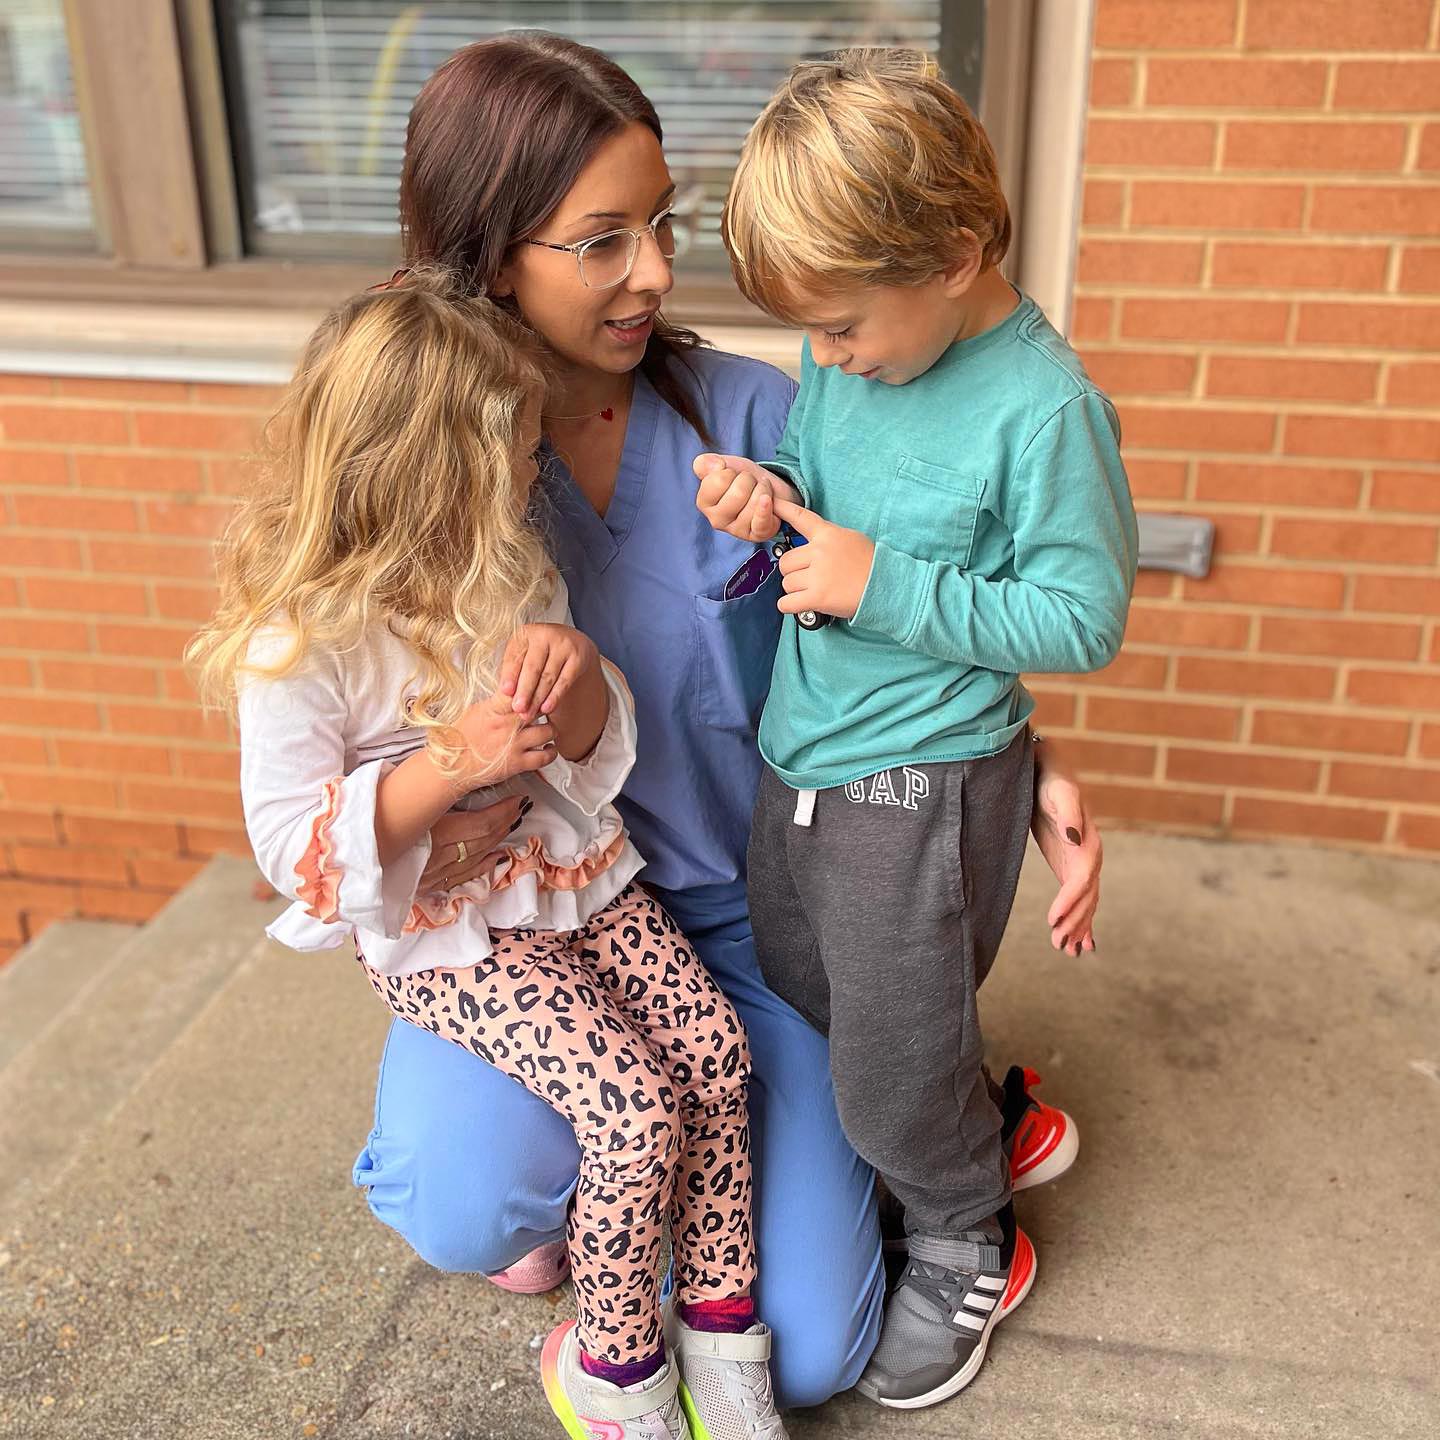 Teen Mom s Mackenzie Edwards Cuts Estranged Husband Ryan Out of Family Photo as Divorce Continues 446